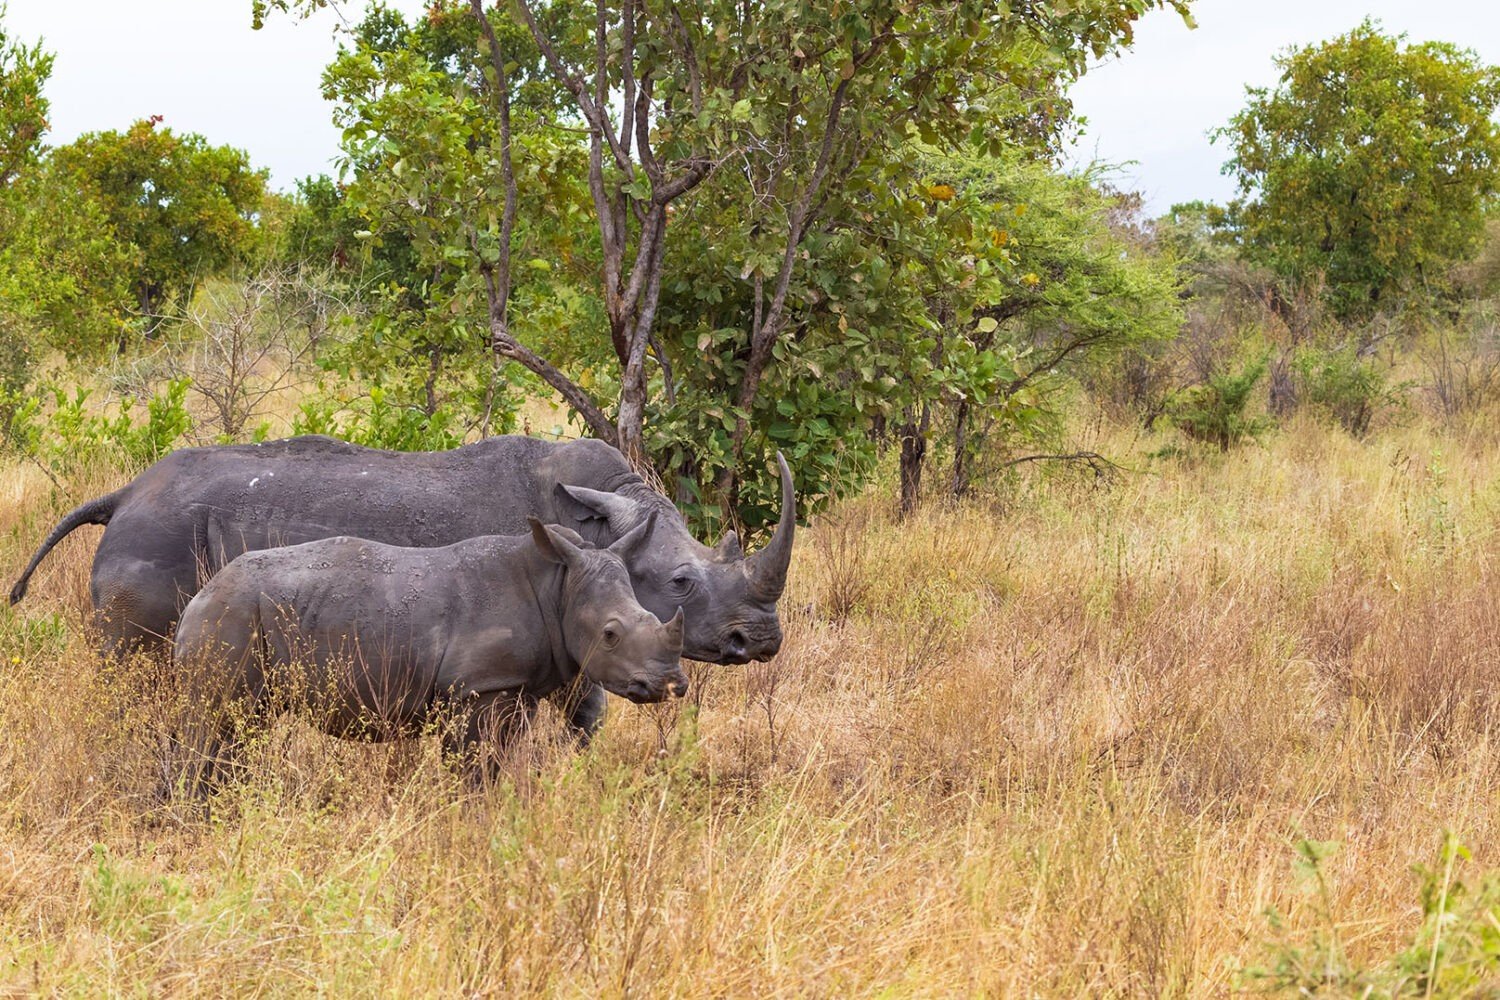 A rhinoceros mother and her baby stand in the savanna. The mother is a large, gray animal with a horn on her nose. The baby is smaller and browner than the mother. They are both looking at the camera.